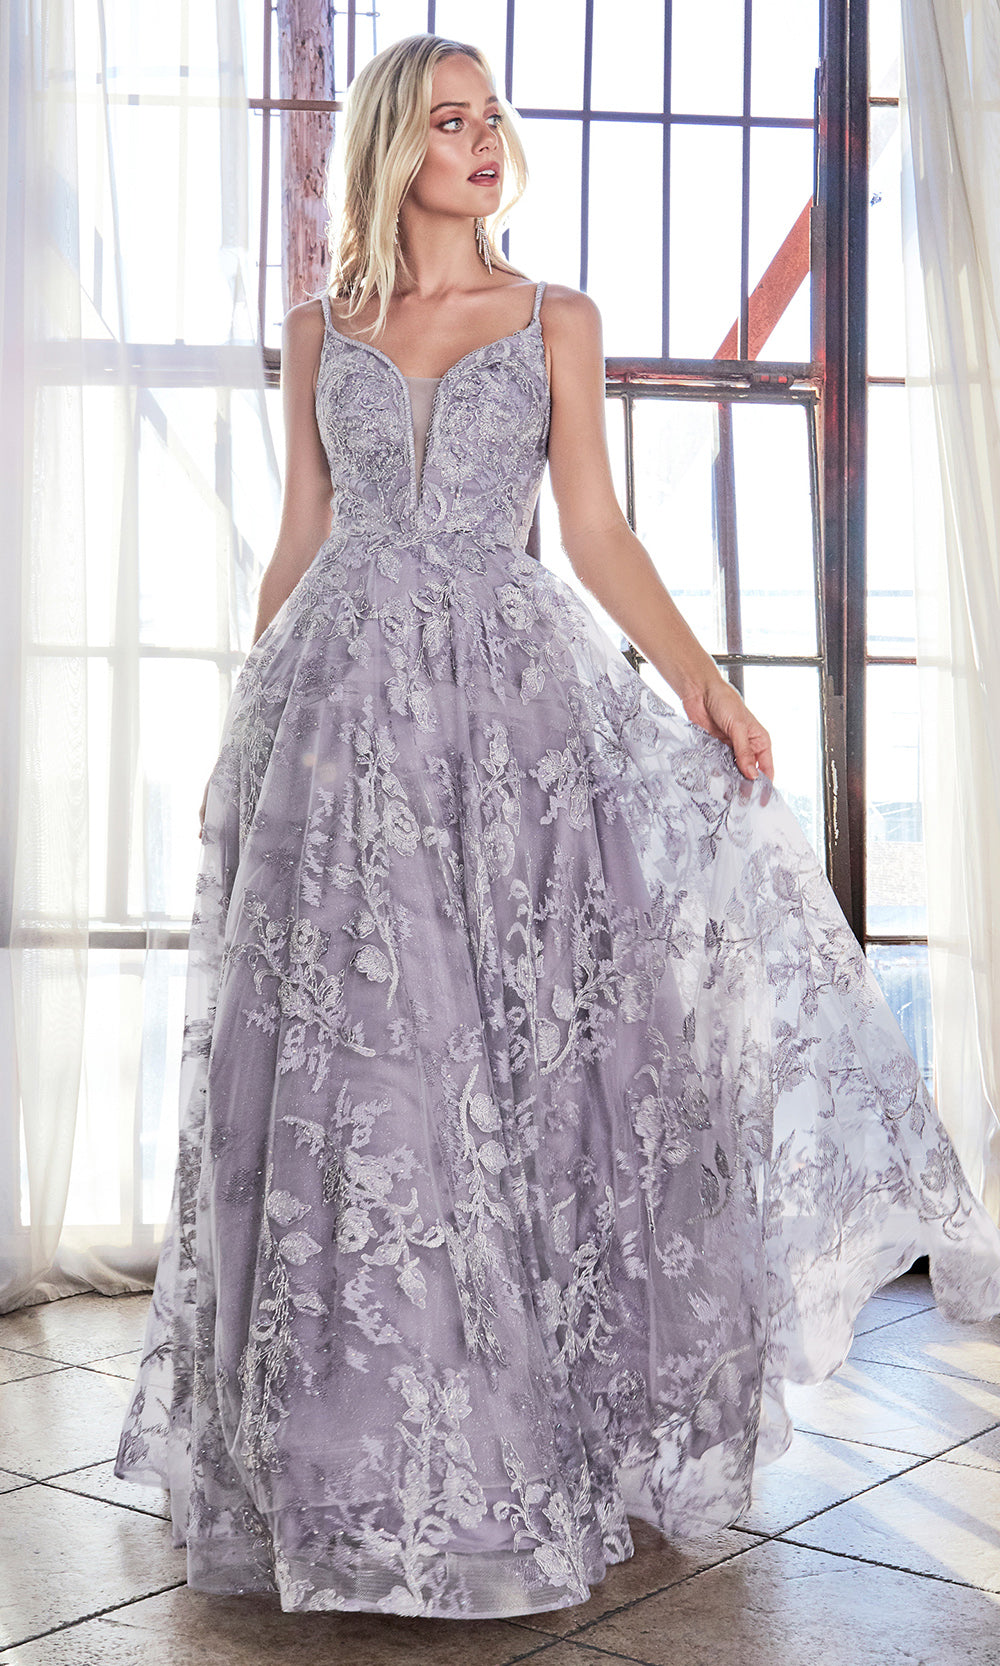 Cinderella Divine CD902 violet v neck lace flowy dress w/straps. Perfect lilac tulle lace dress for prom, wedding reception or engagement dress, indowestern gown, sweet 16, debut, quinceanera, formal party dress. Plus sizes avail.jpg